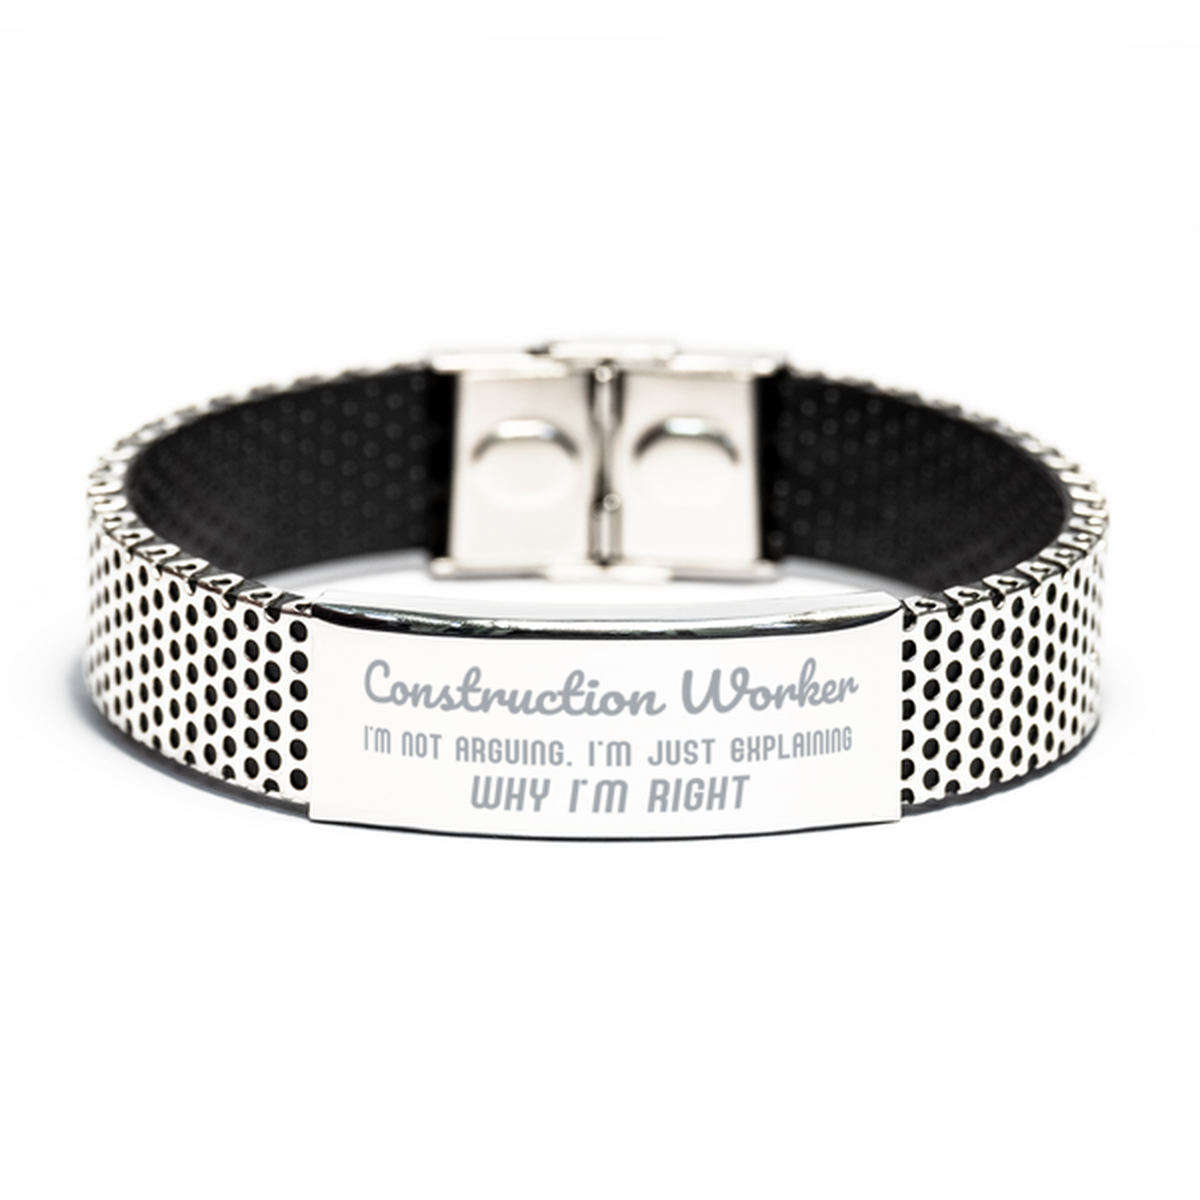 Construction Worker I'm not Arguing. I'm Just Explaining Why I'm RIGHT Stainless Steel Bracelet, Funny Saying Quote Construction Worker Gifts For Construction Worker Graduation Birthday Christmas Gifts for Men Women Coworker